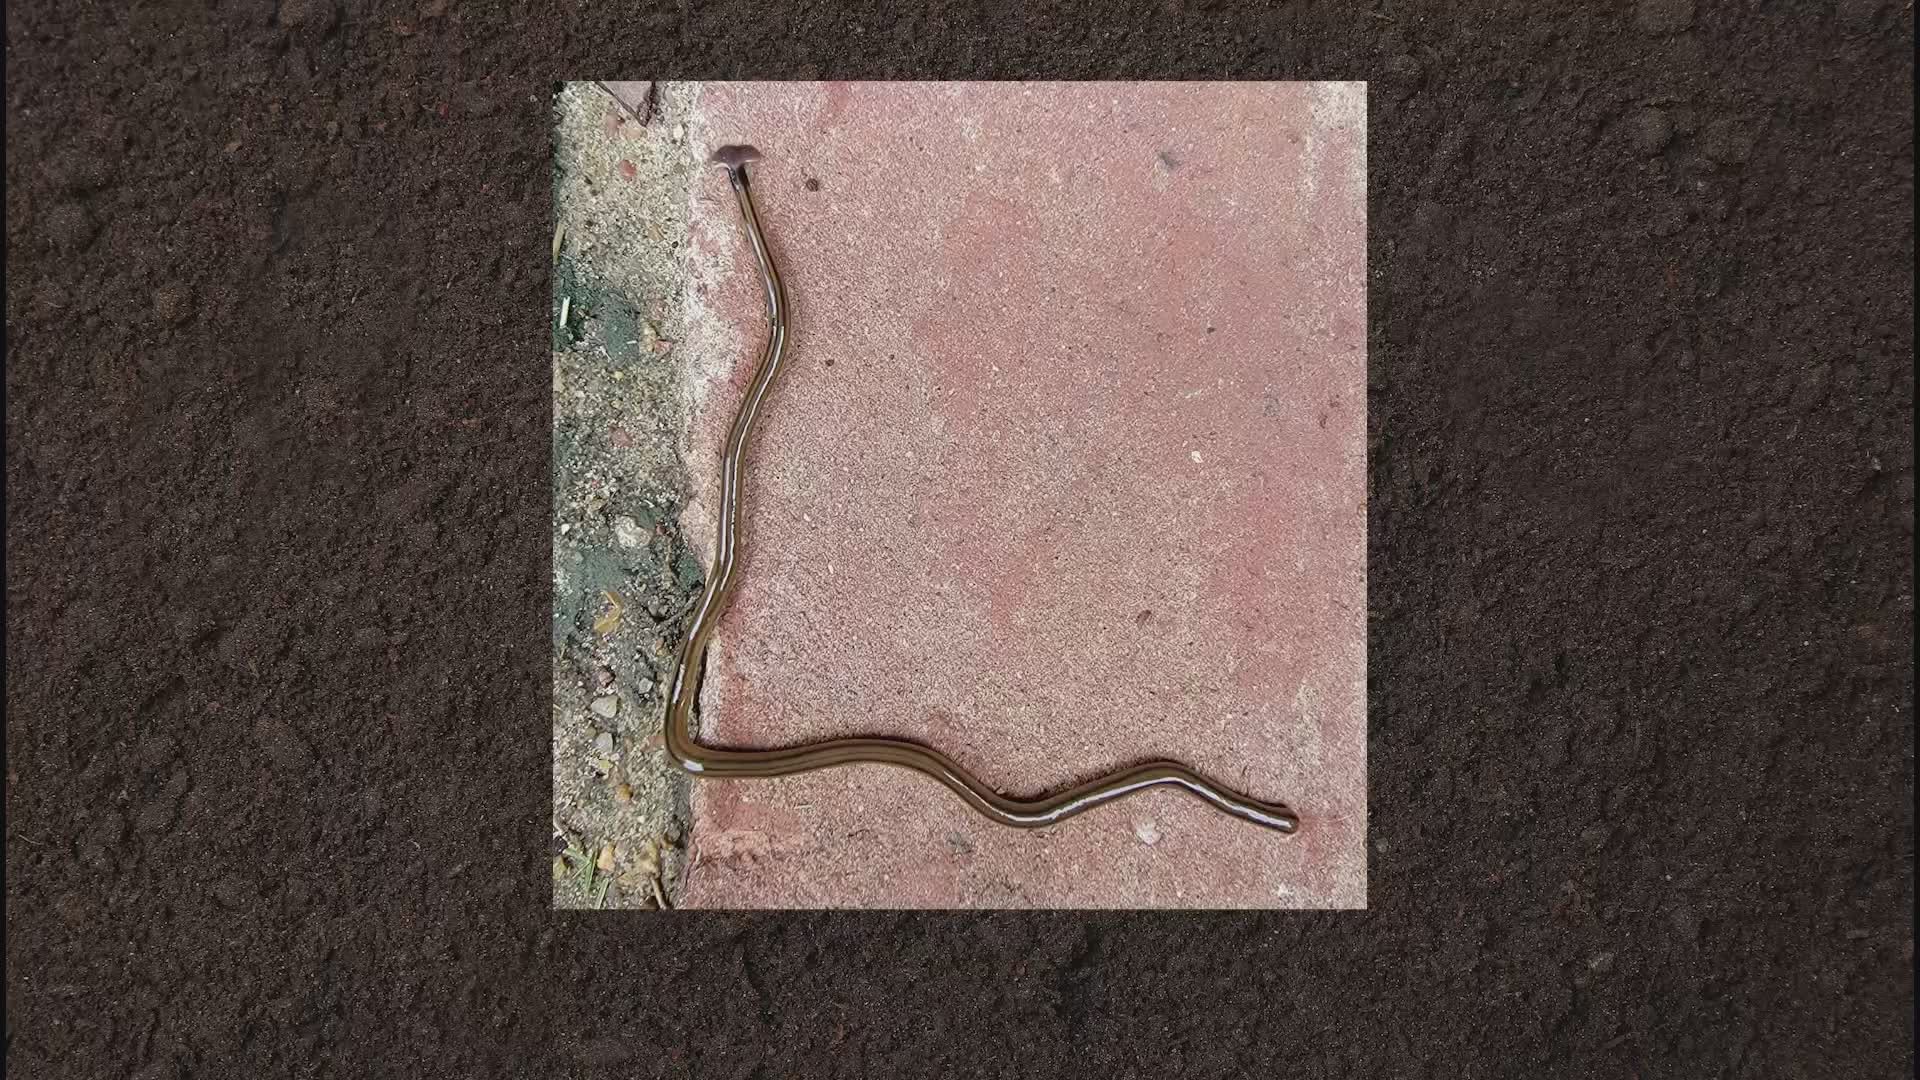 A woman in Dallas shared a photo of a hammerhead flatworm, giving details about how harmful it is and who to contact if you find one in your yard.